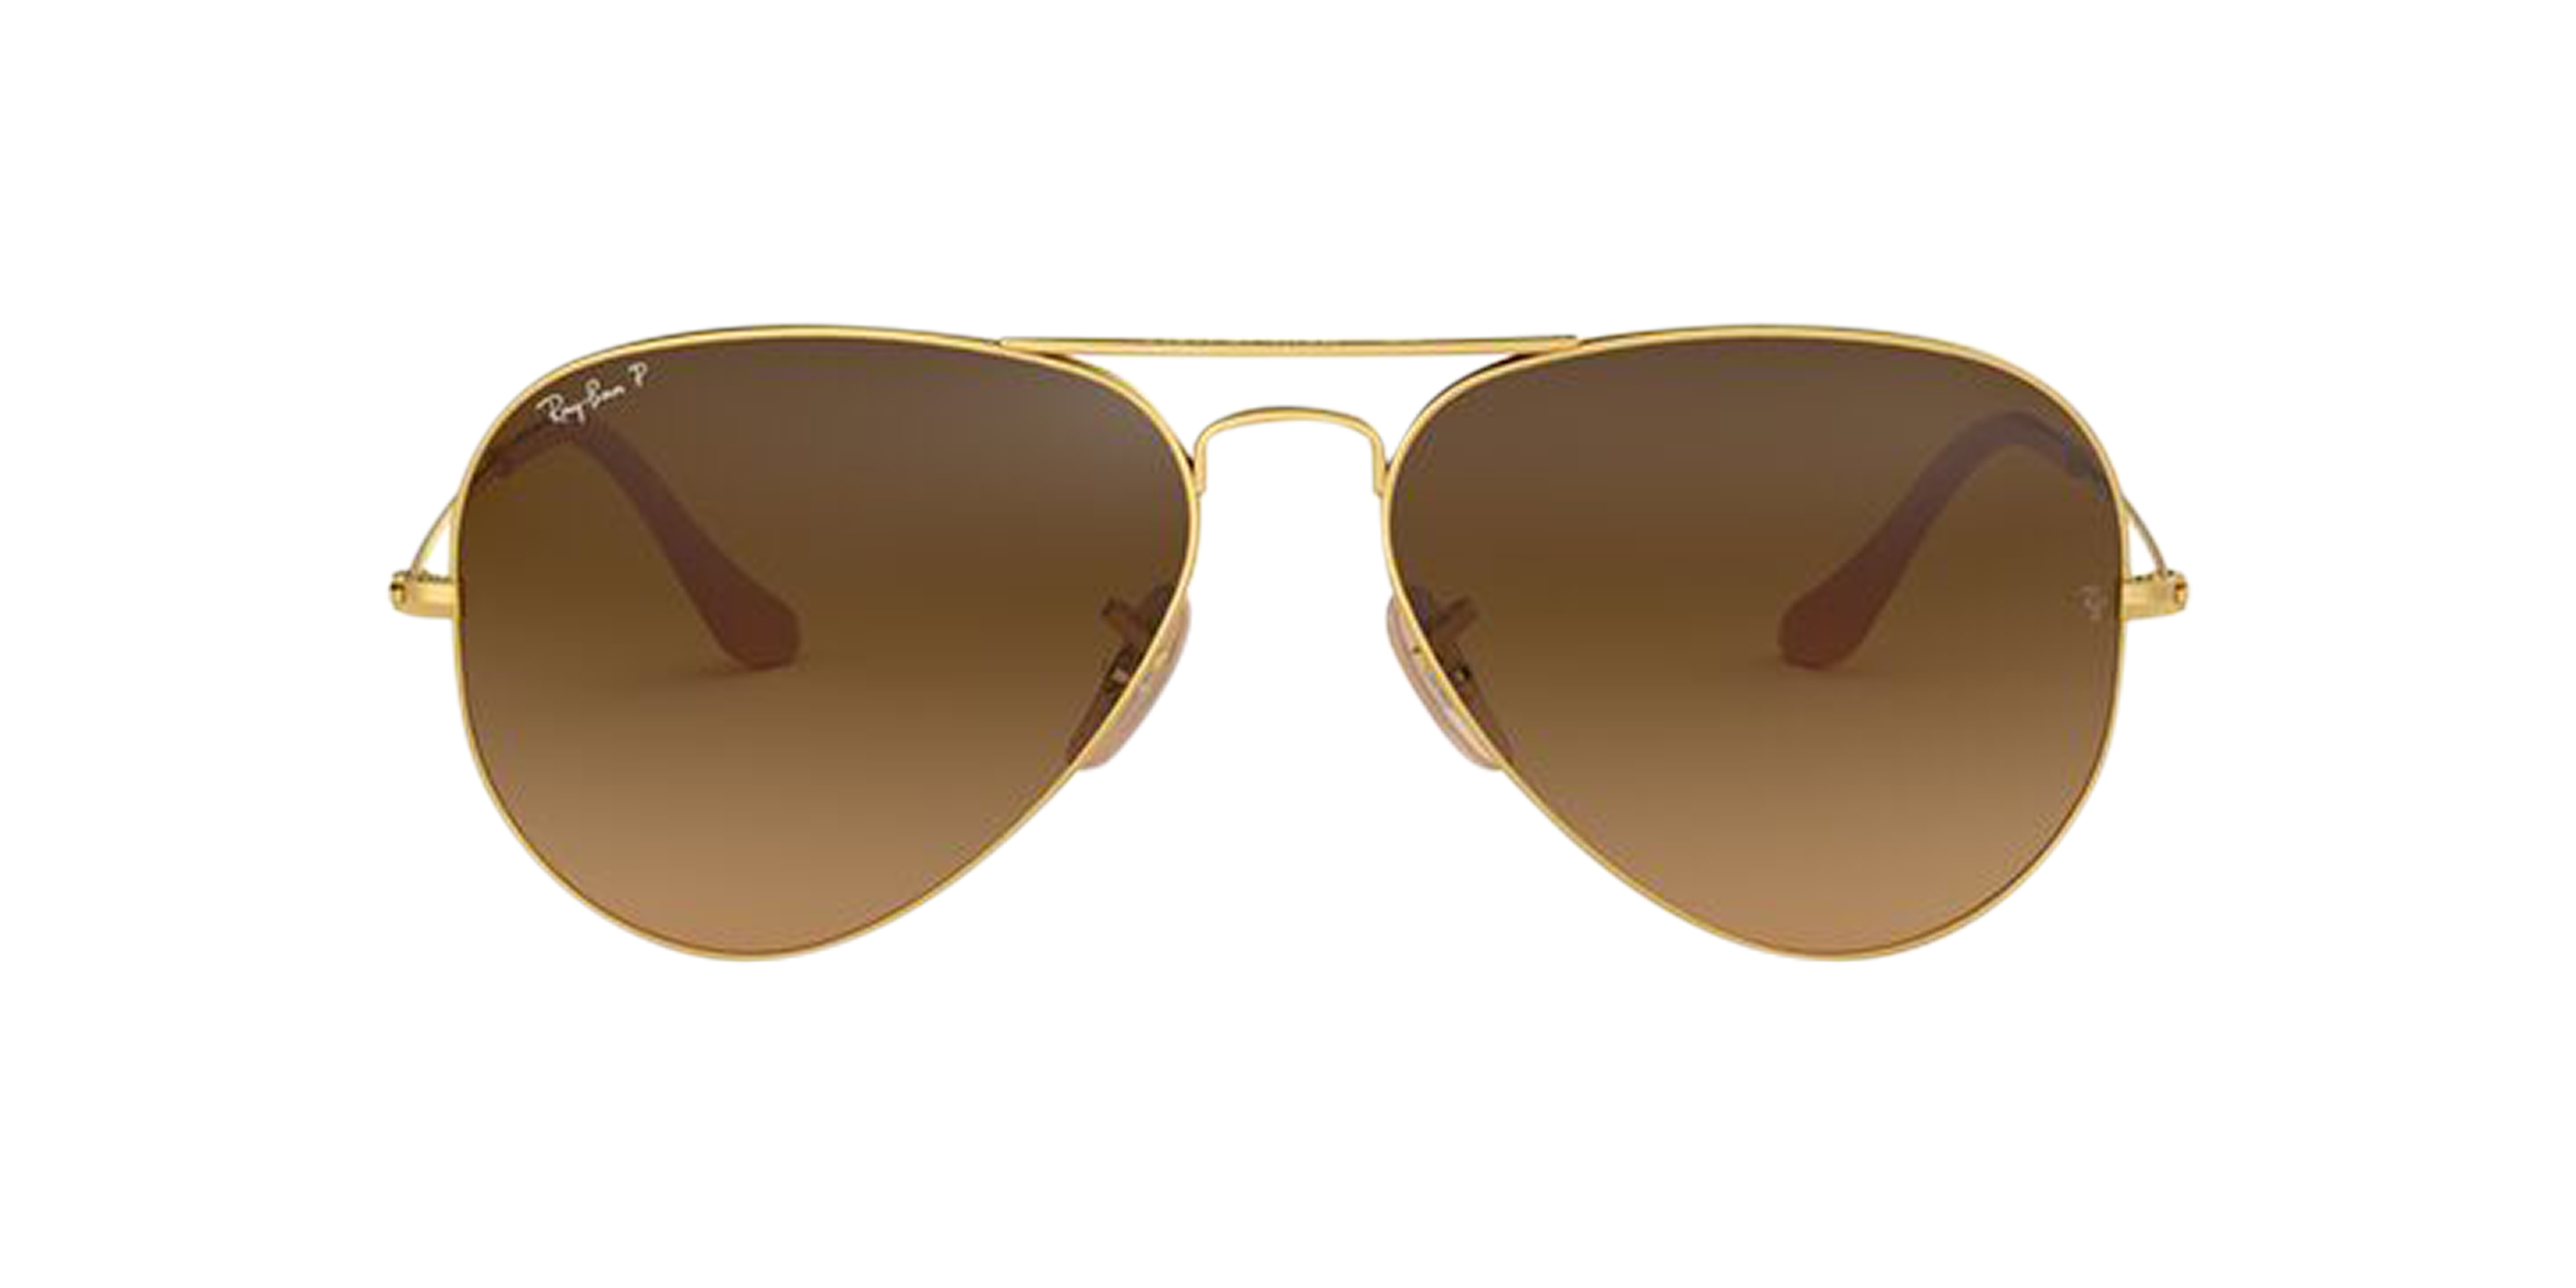 [products.image.front] RAY-BAN RB3025 112/M2